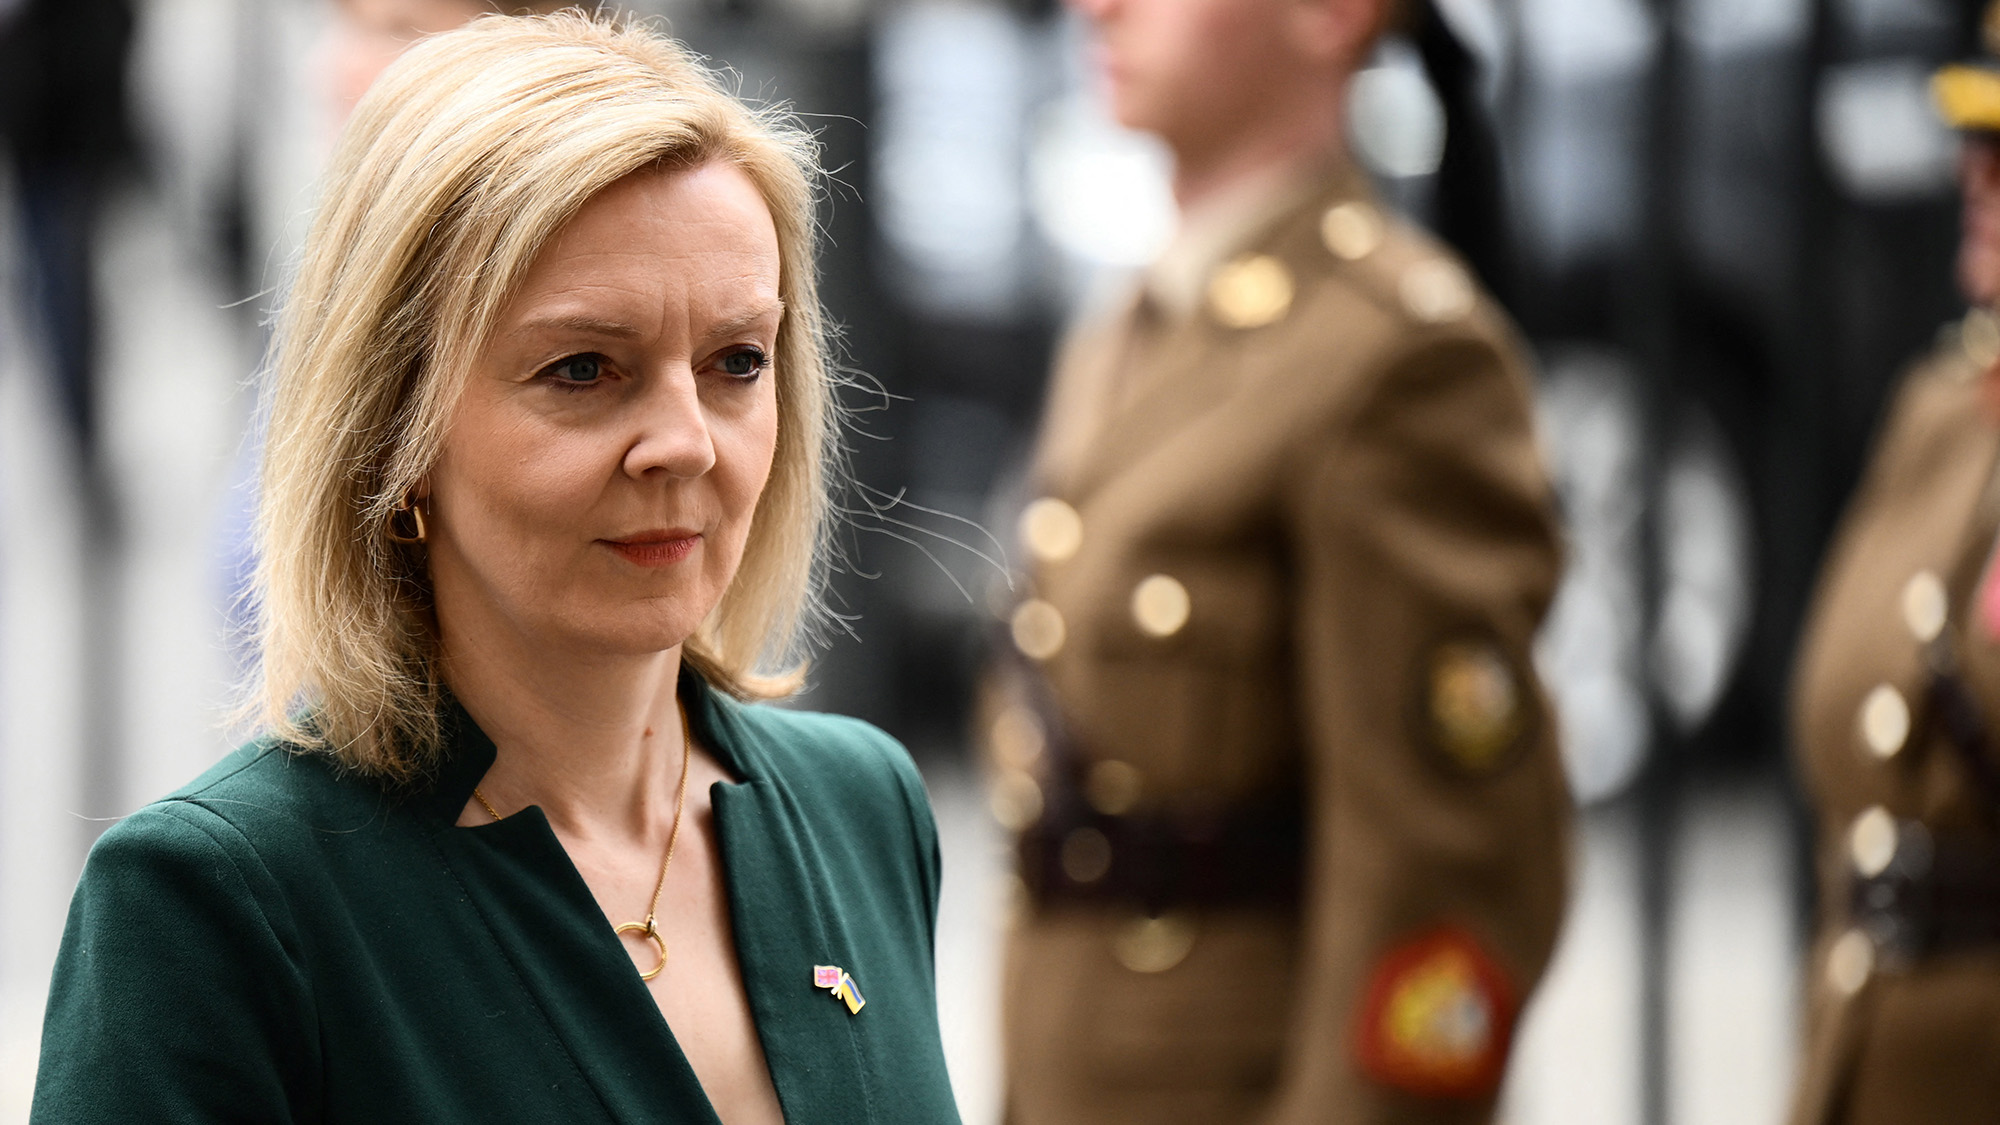 Britain's Foreign Secretary Liz Truss arrives to attend a Service of Thanksgiving for Britain's Prince Philip, Duke of Edinburgh, at Westminster Abbey in central London on March 29.